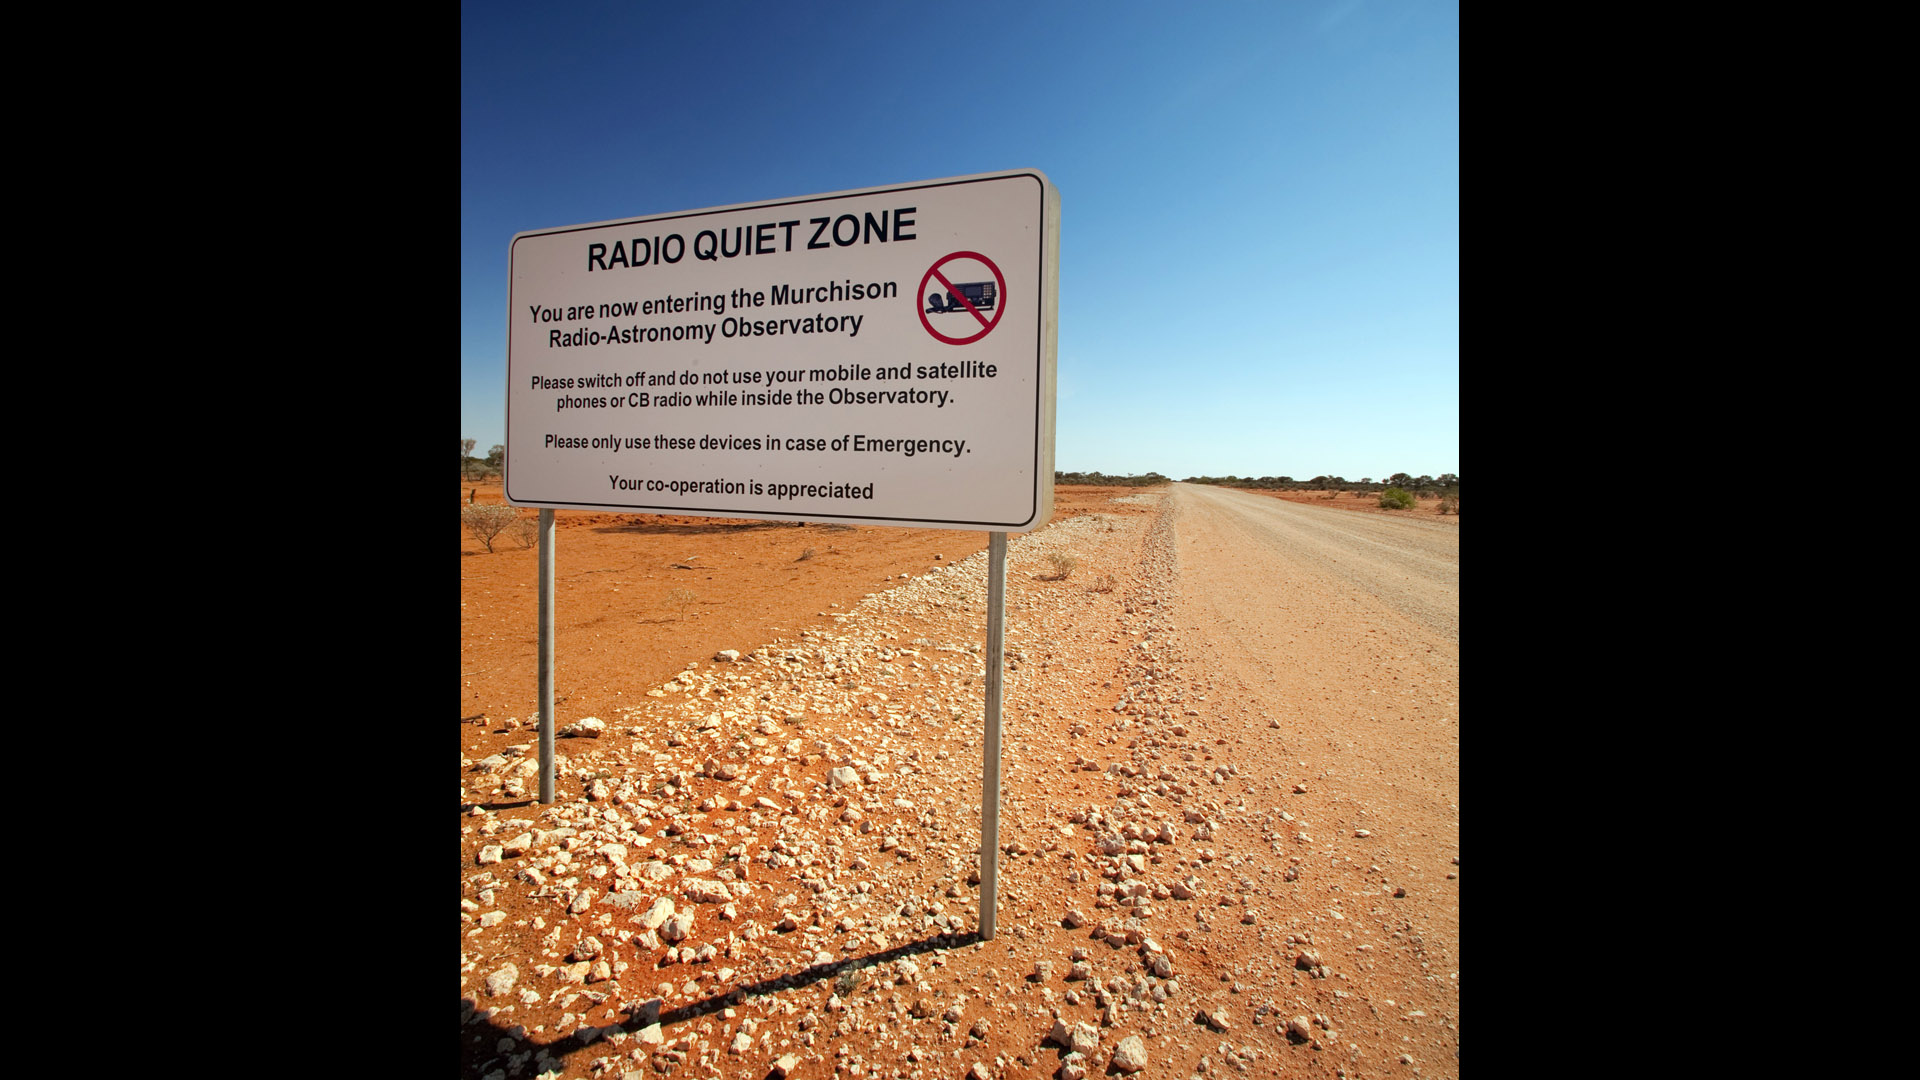 The Square Kilometer Array observatory sites are protected as radio-quiet zones that are out of reach of cell phone as well as terrestrial TV and radio networks.